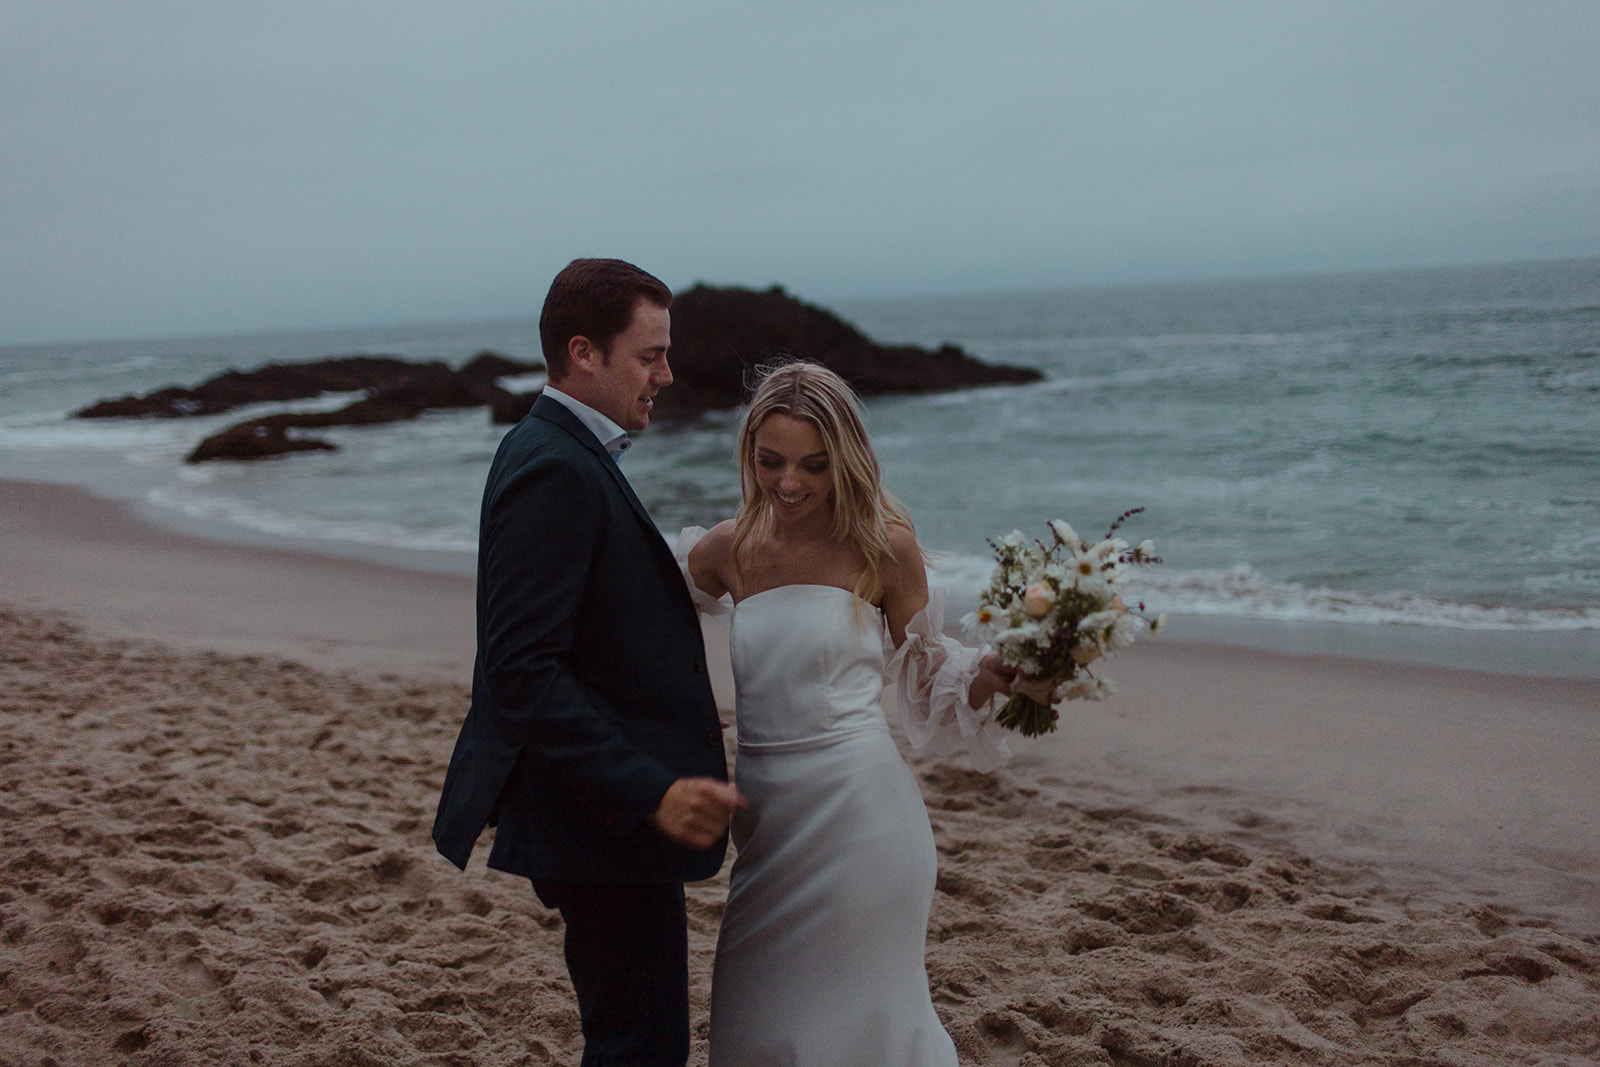 California Coast Blue Hour Elopement at Laguna Beach with bride and groom holding each other and beautiful beach backdrops